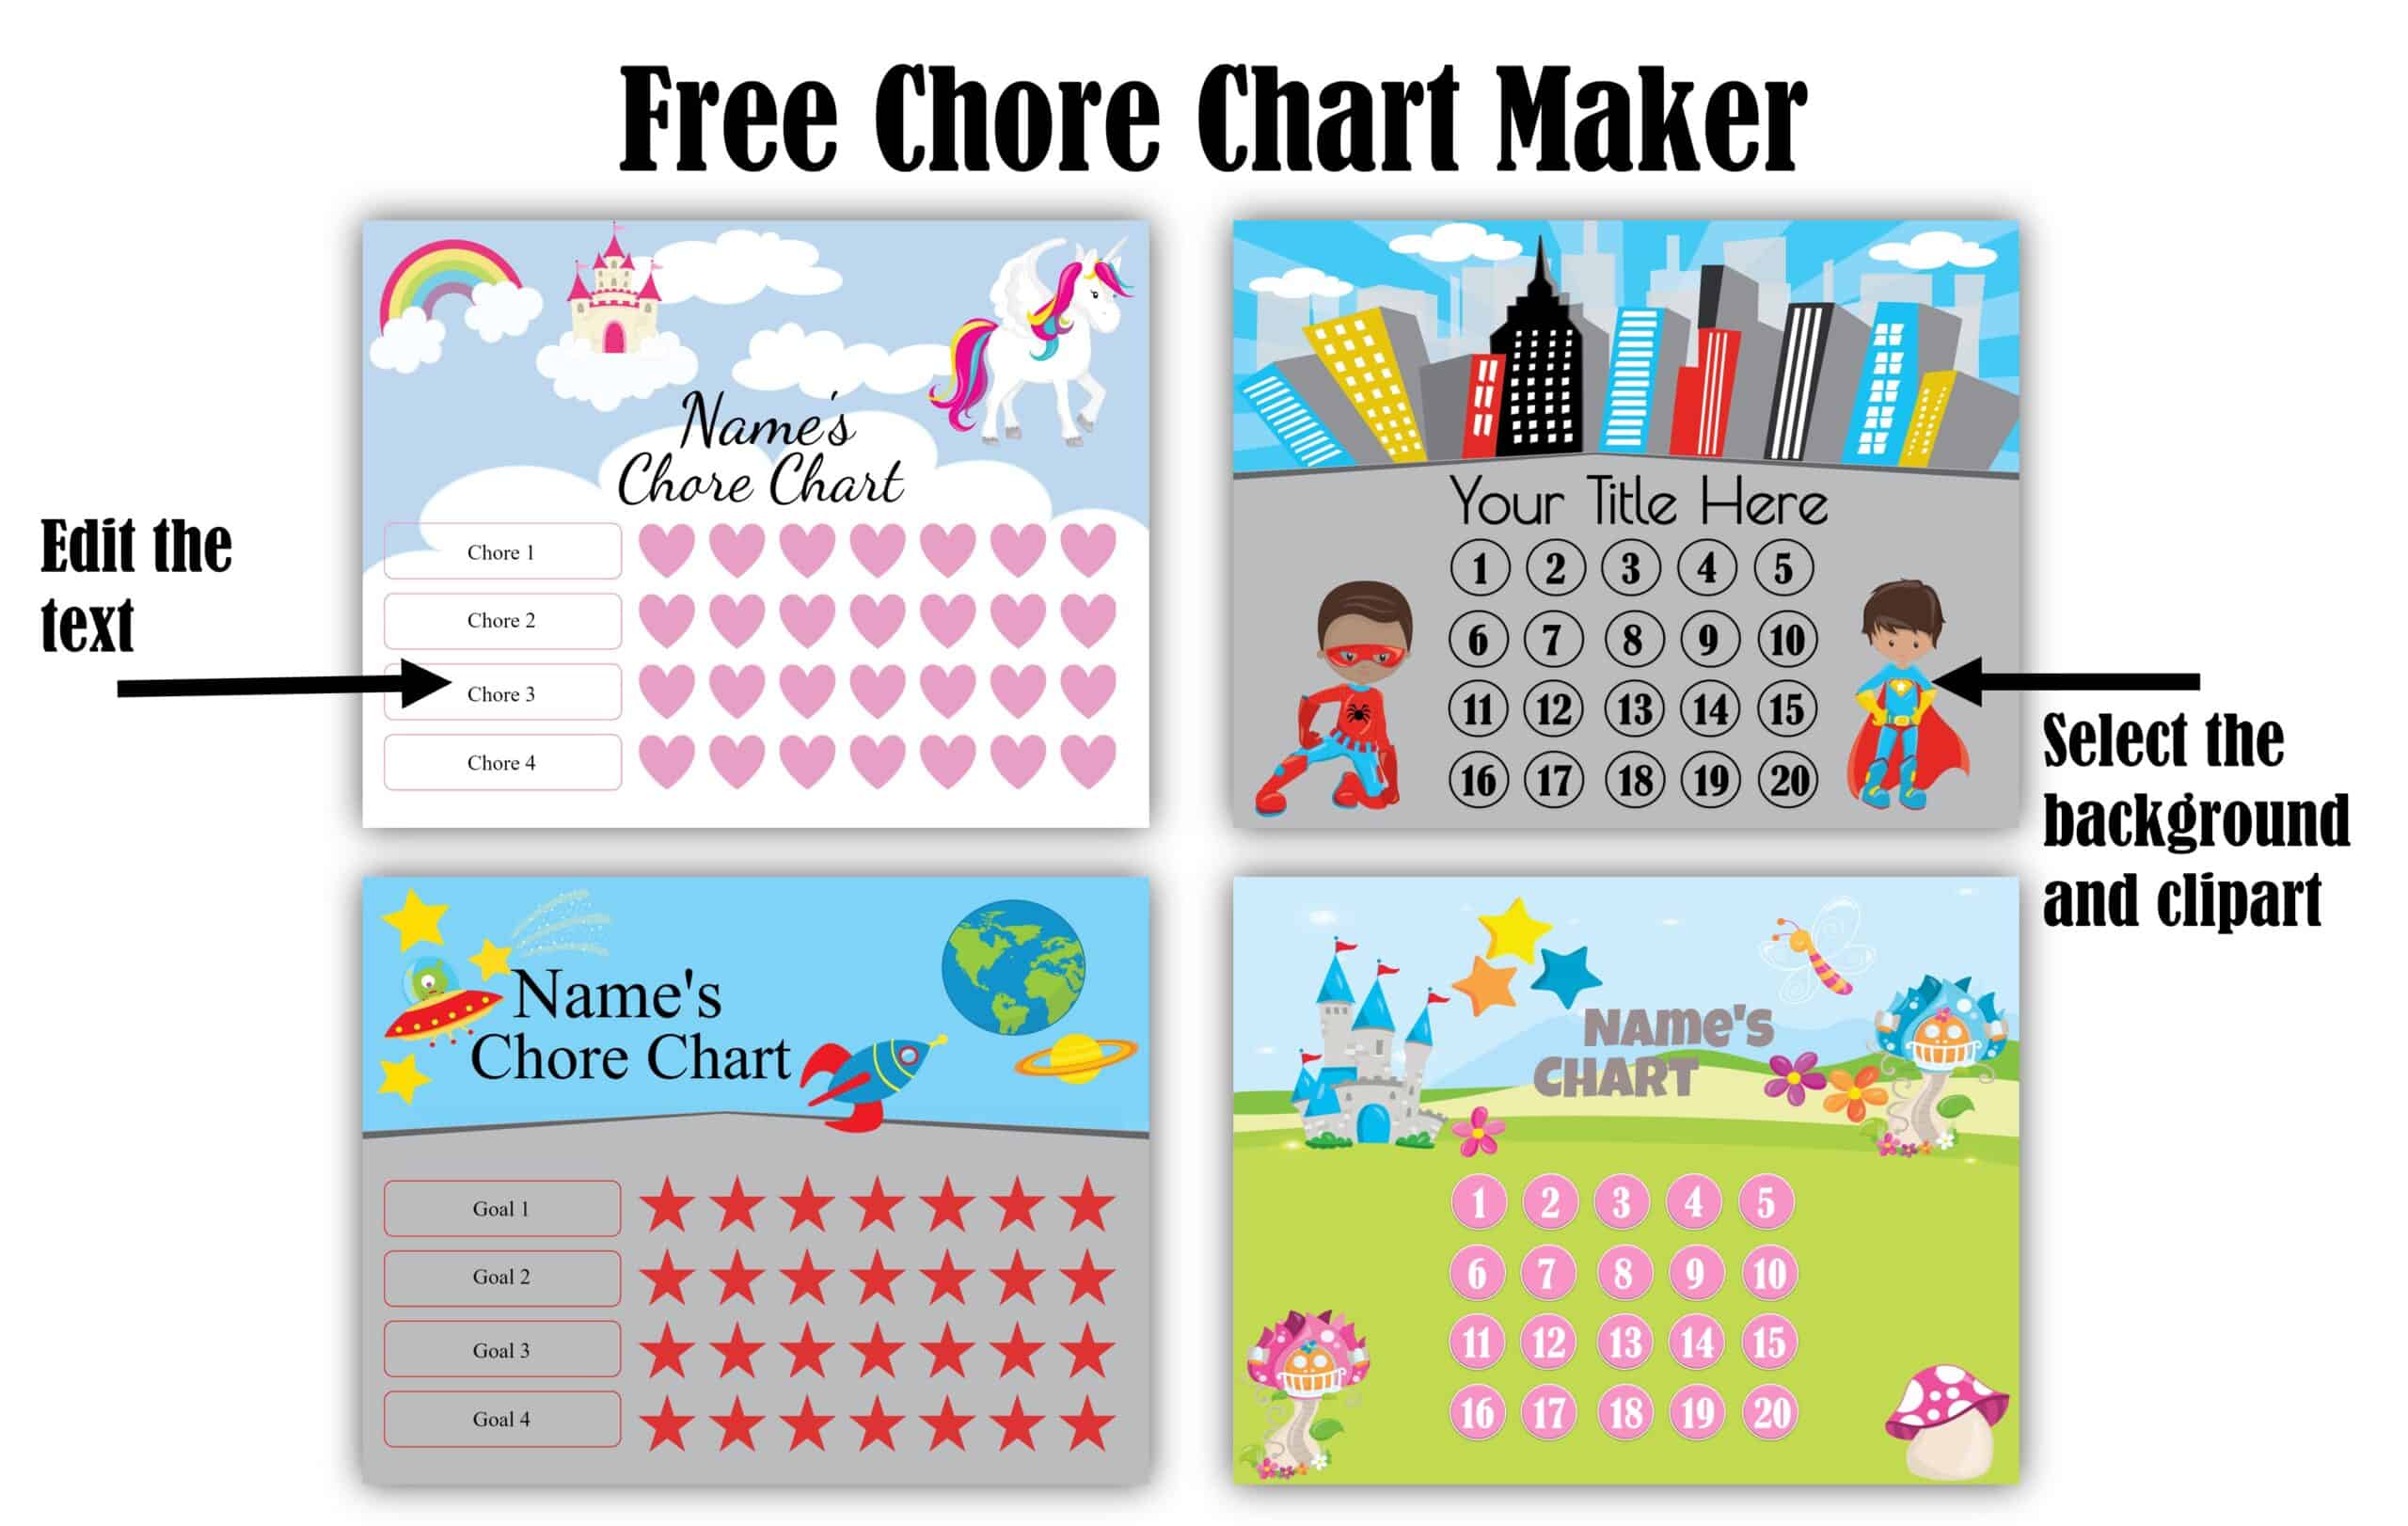 Chores For 14 Year Olds Chore List Free Chore Charts